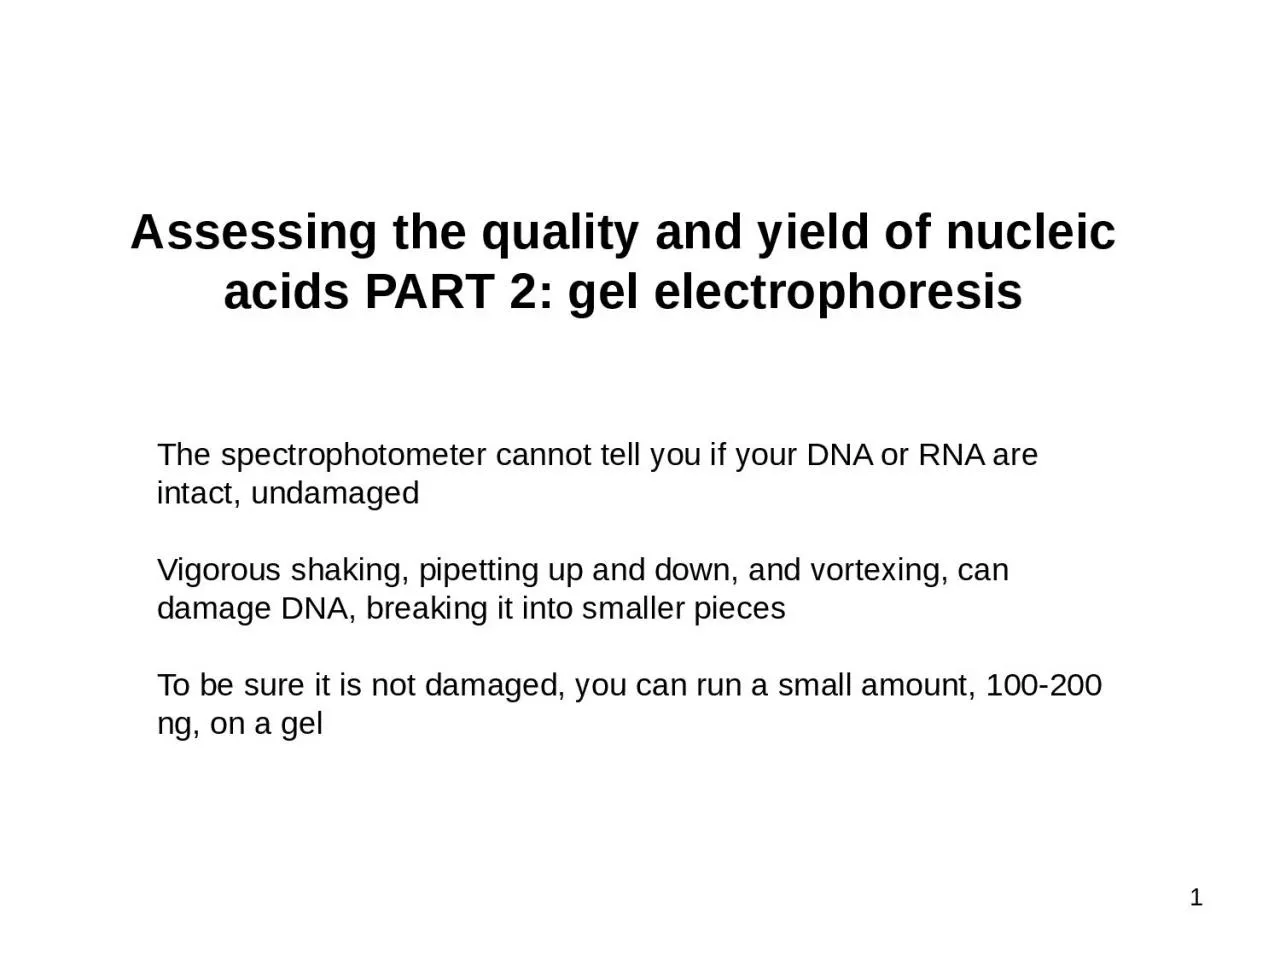 Assessing the quality and yield of nucleic acids PART 2: gel electrophoresis